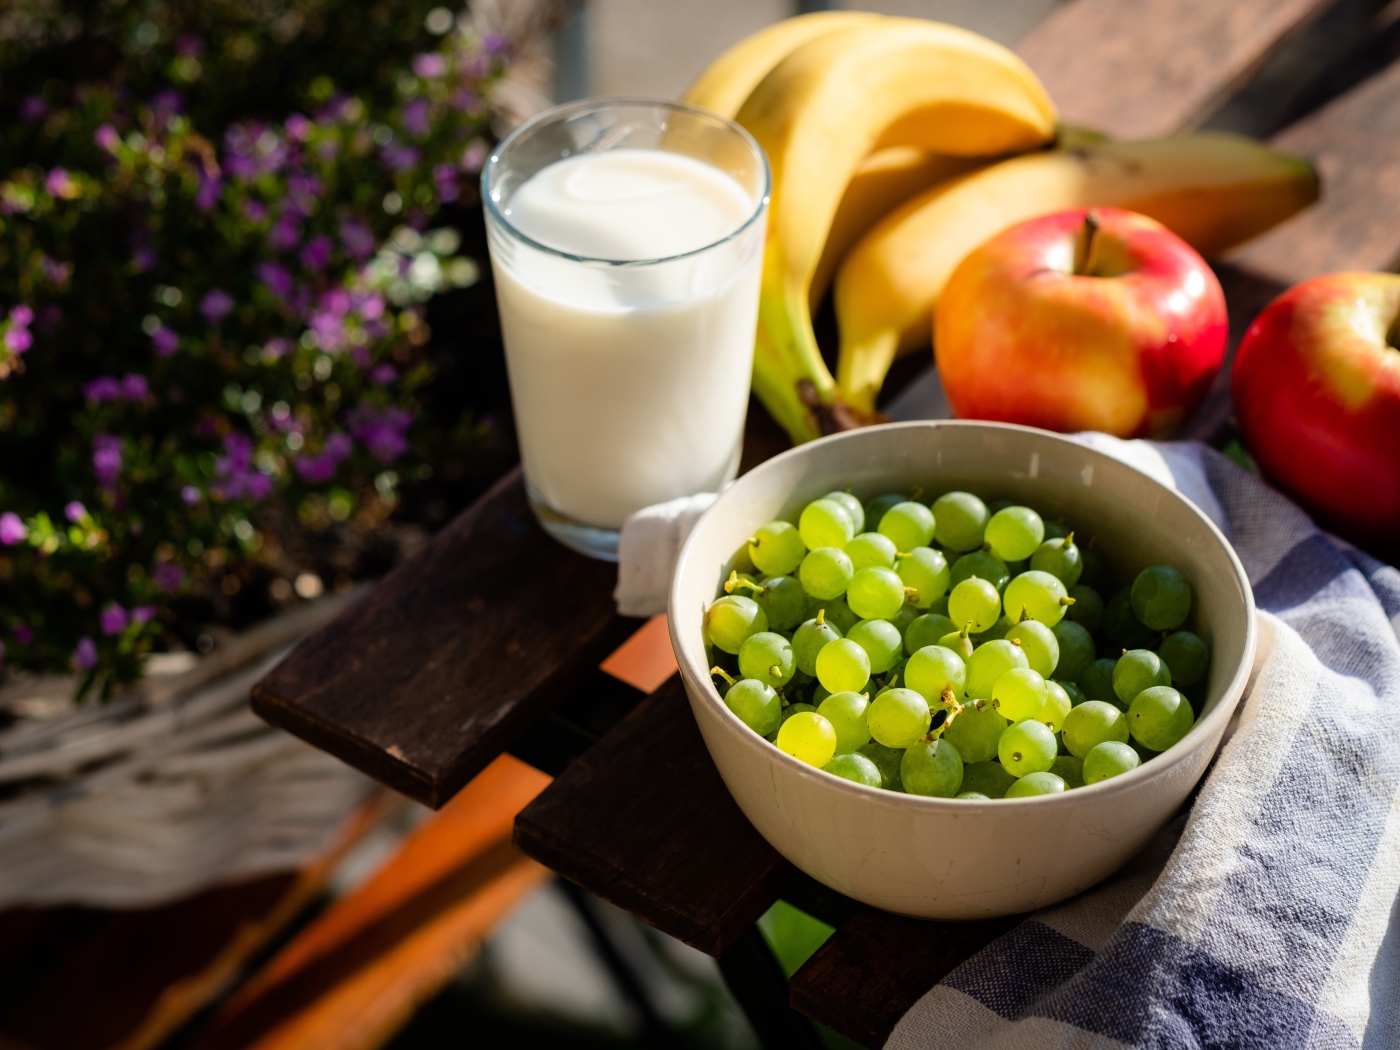 Green grapes on the table with bananas, apples and milk